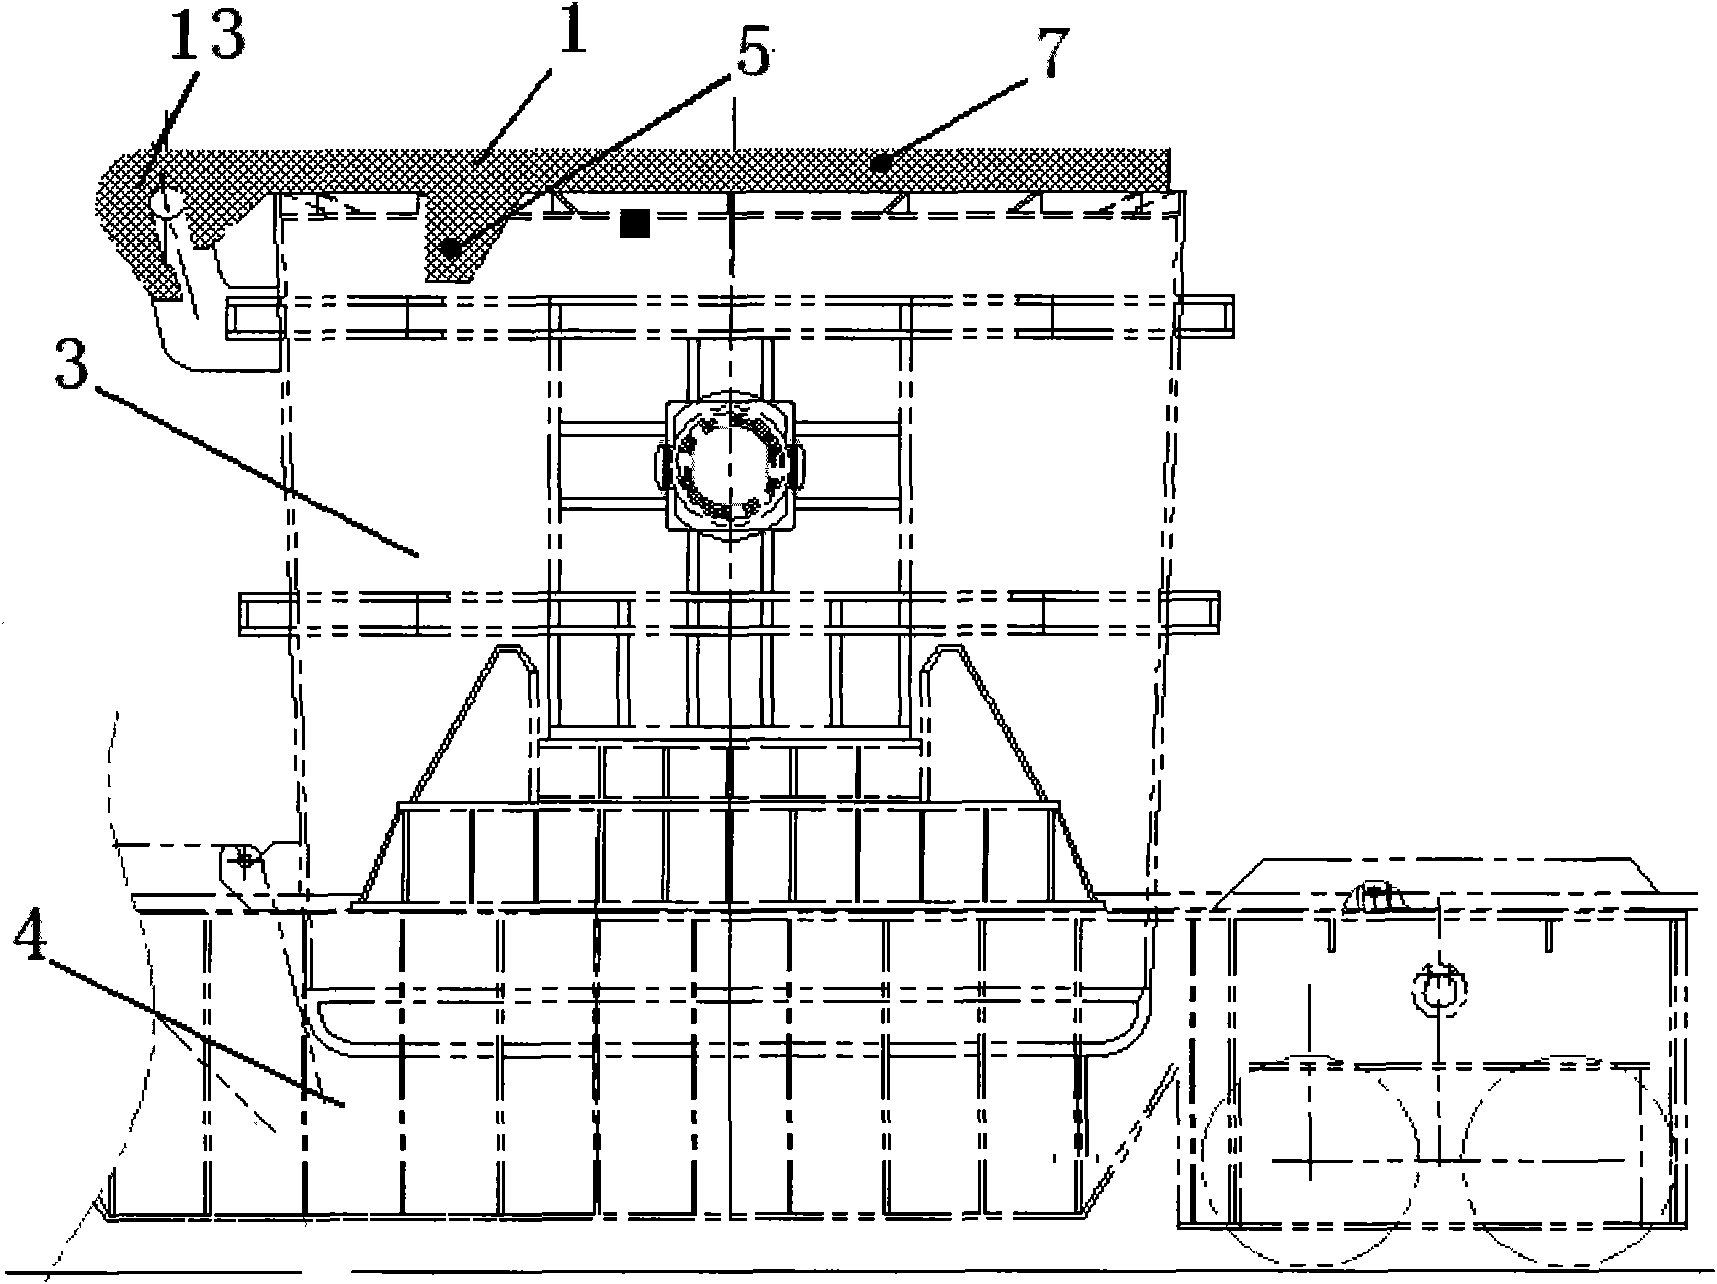 Automatically covering/uncovering system of steel ladle